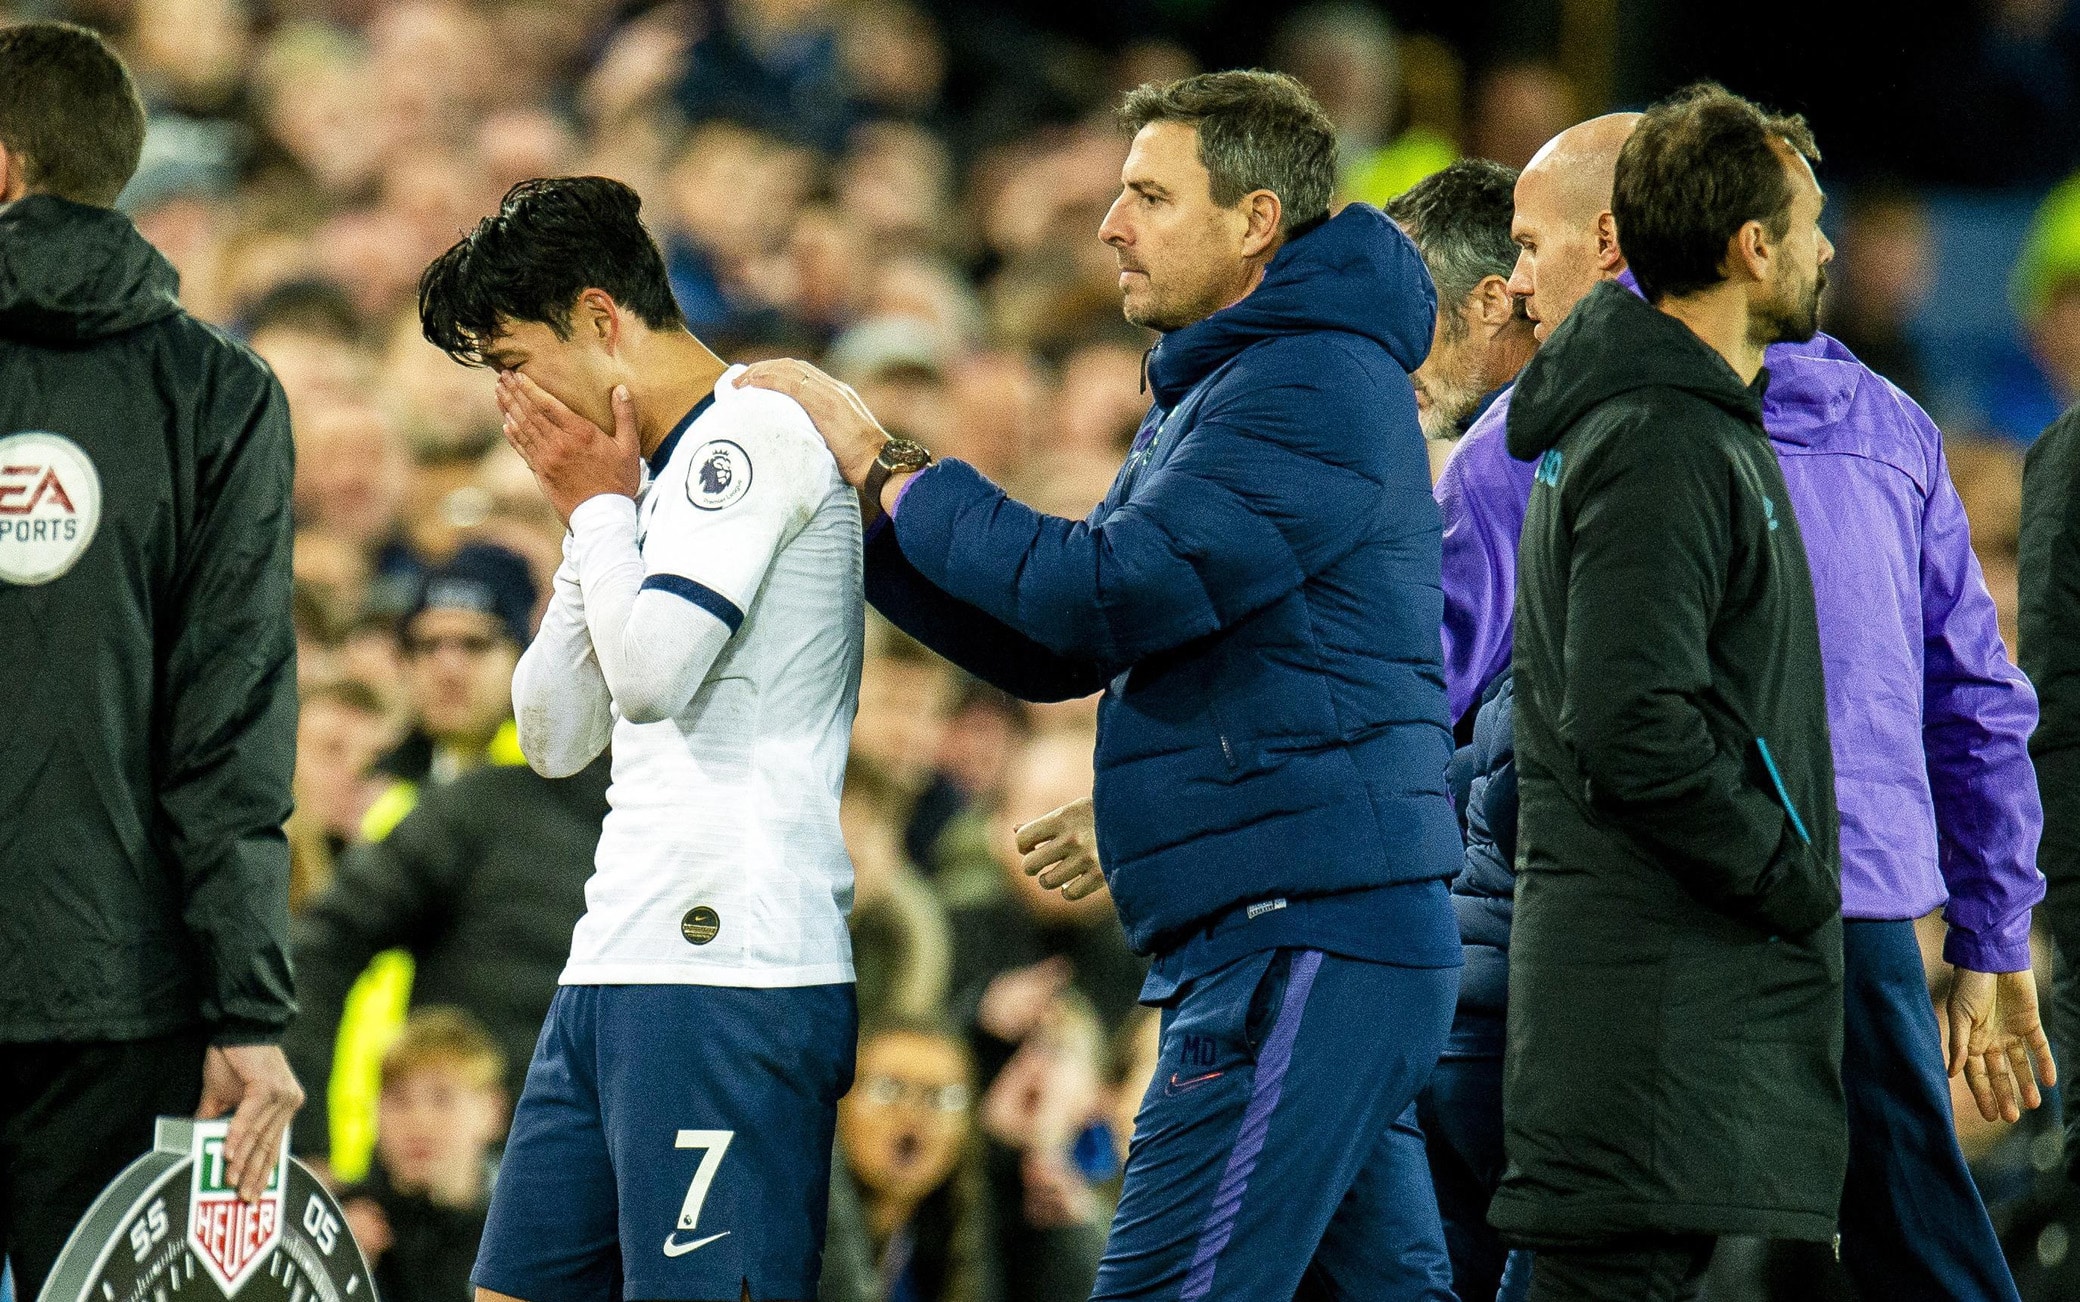 epa07970274 Tottenham Hotspur's Son Heung-min (L) reacts after tackling Everton's Andre Gomes causing an injury to the Everton player during the English Premier League soccer match between Everton FC and Tottenham Hotspur at the Goodison Park in Liverpool, Britain, 03 November 2019.  EPA/PETER POWELL EDITORIAL USE ONLY. No use with unauthorized audio, video, data, fixture lists, club/league logos or 'live' services. Online in-match use limited to 120 images, no video emulation. No use in betting, games or single club/league/player publications